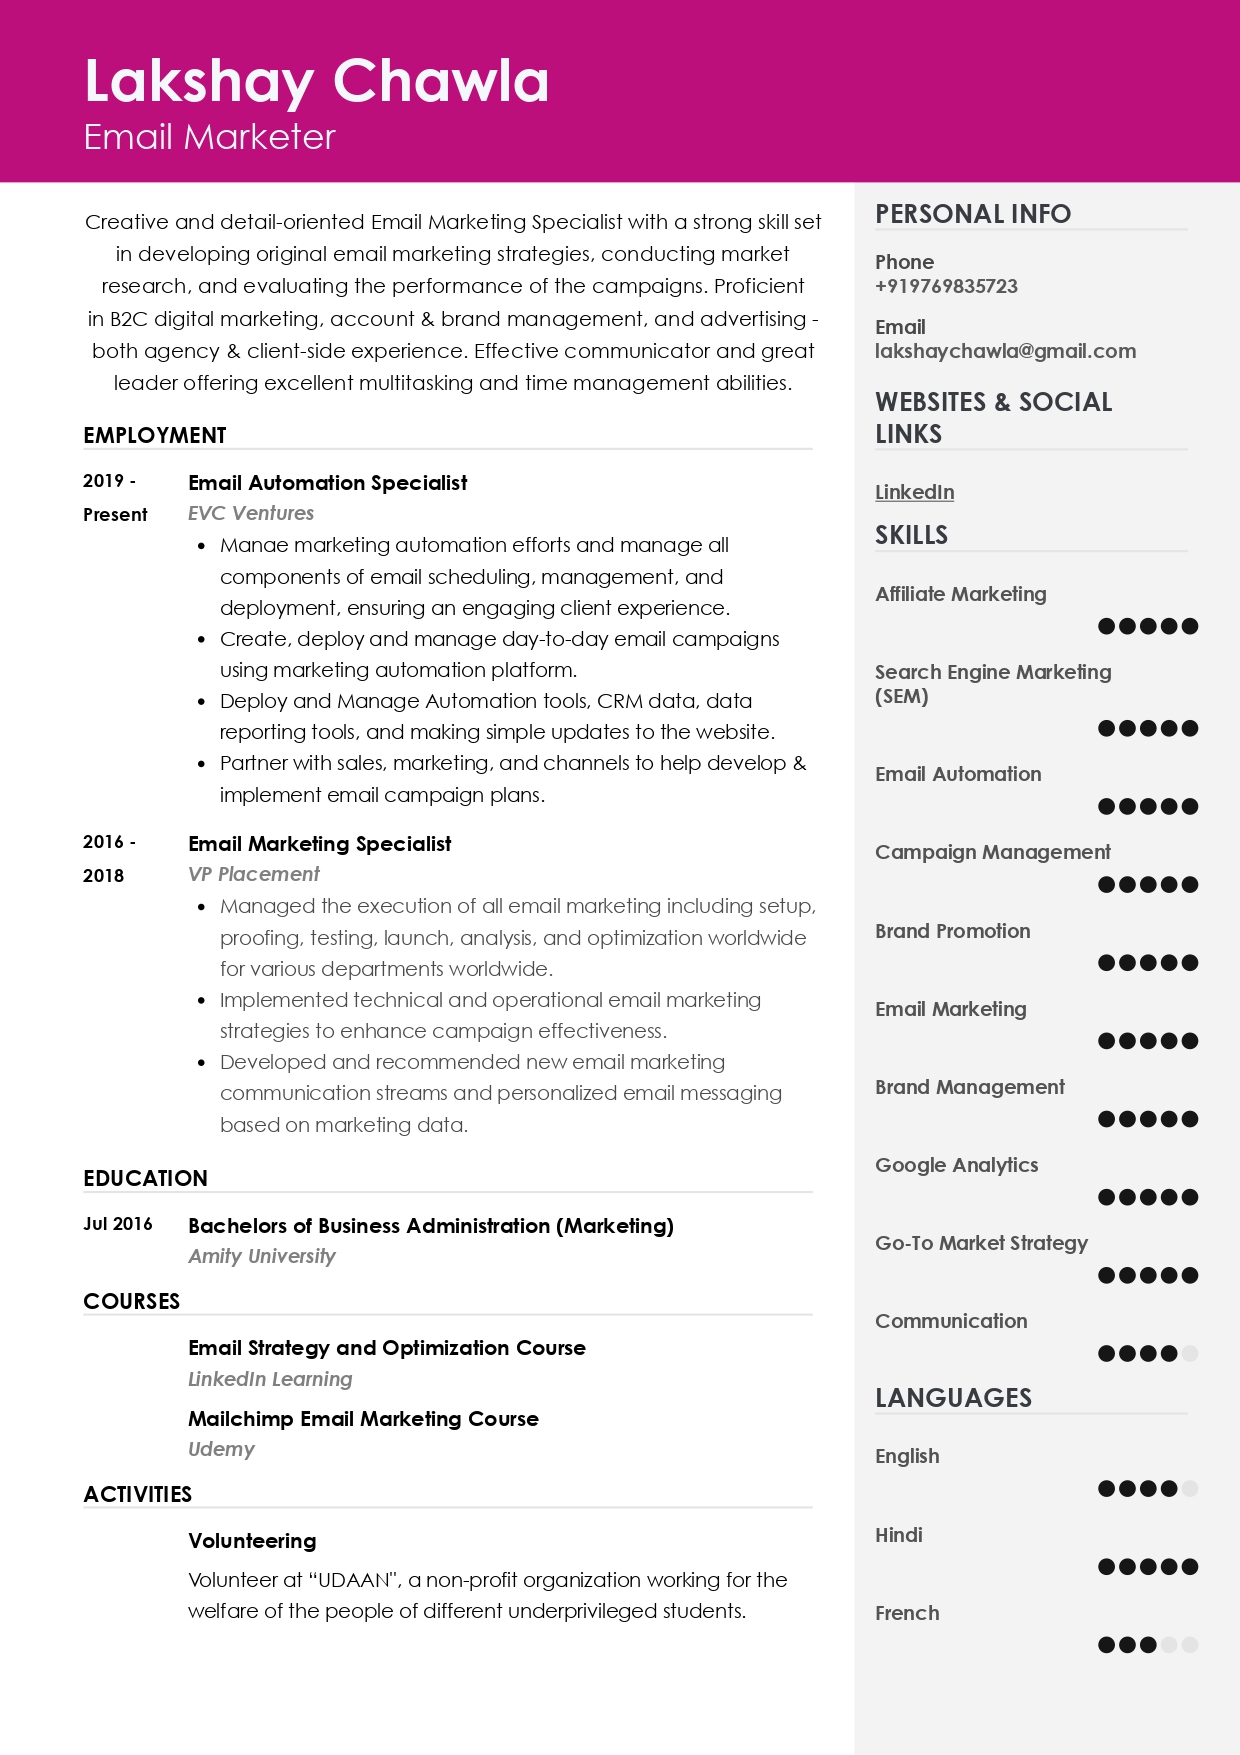 Resume of Email Marketer